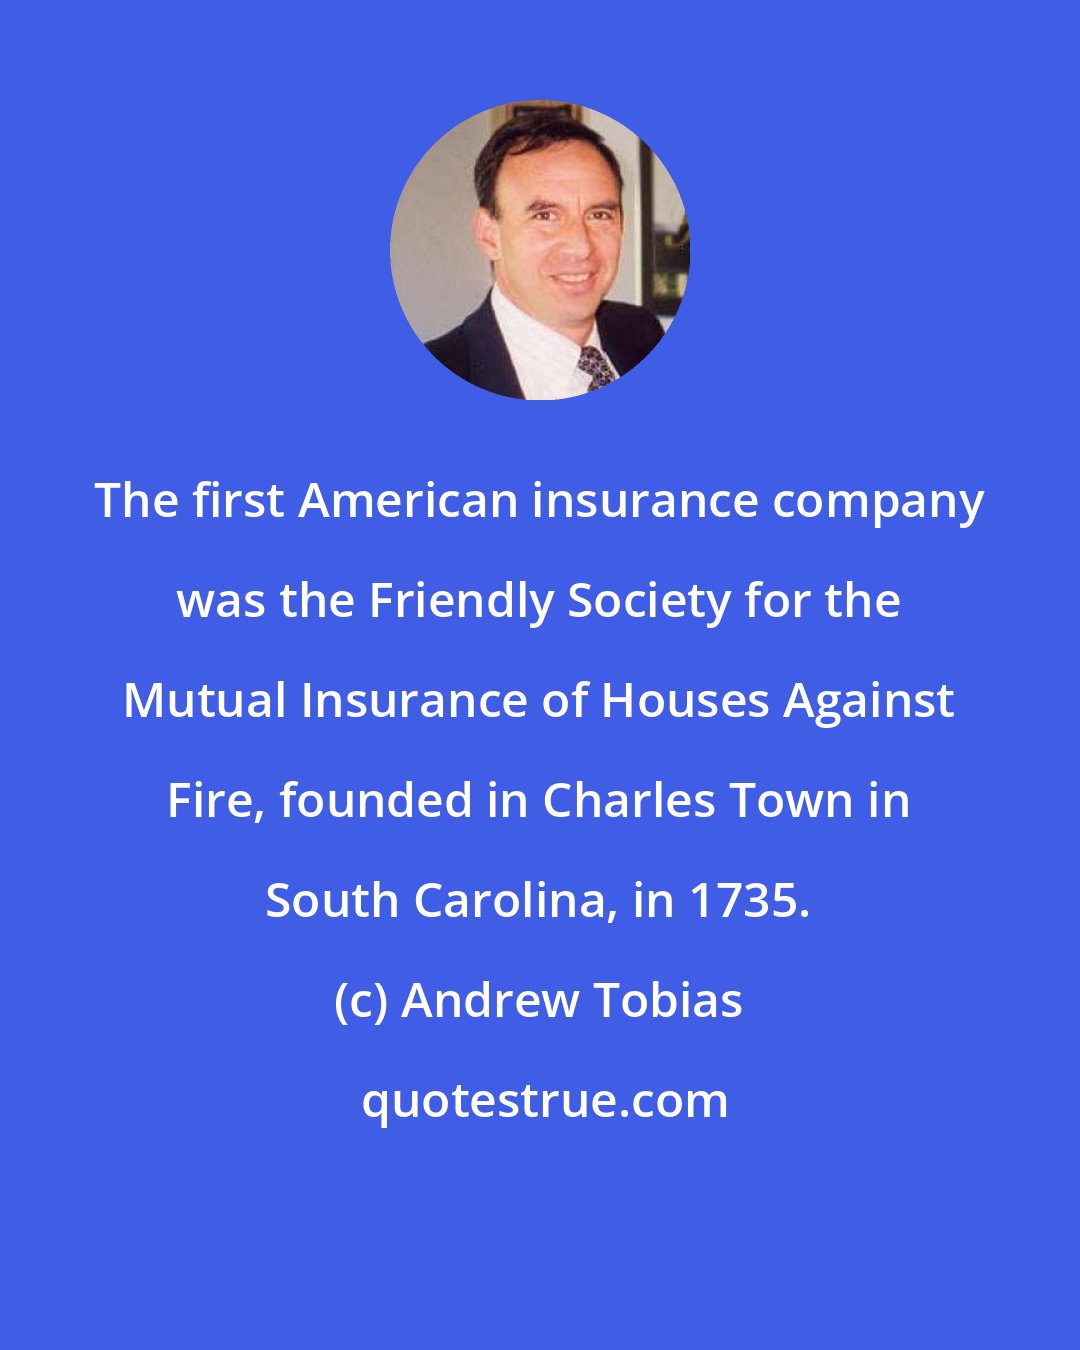 Andrew Tobias: The first American insurance company was the Friendly Society for the Mutual Insurance of Houses Against Fire, founded in Charles Town in South Carolina, in 1735.